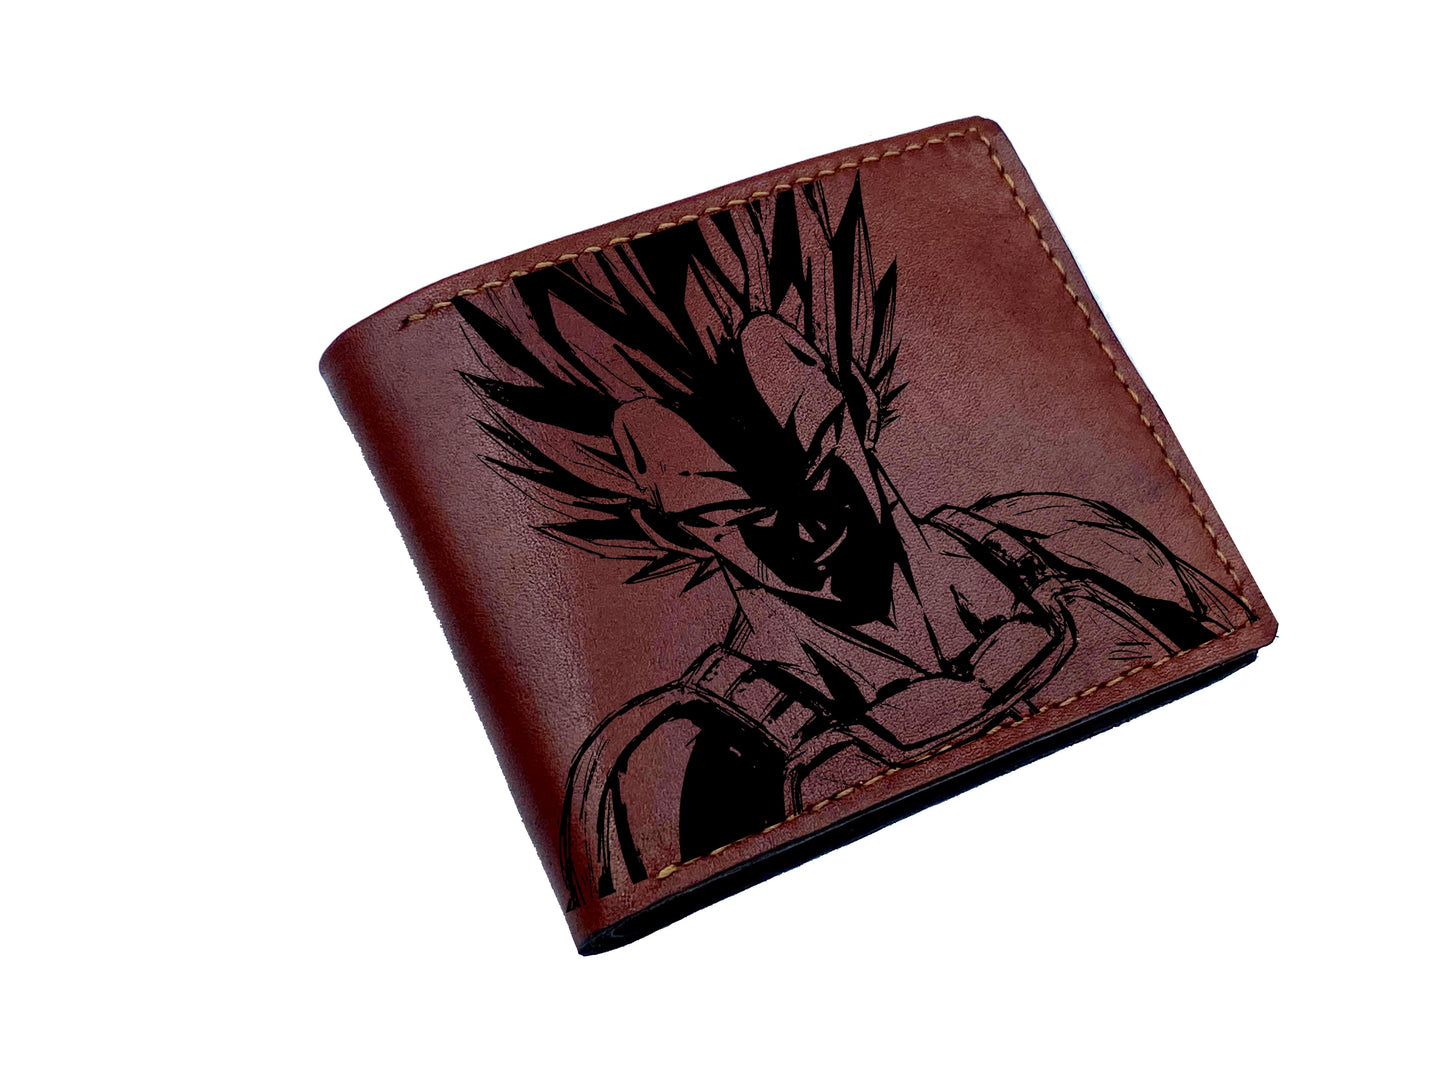 Mayan Corner - Freiza golden form leather wallet, customized dragon ball wallet, dragon ball leather gift for husband, cool gift for dad, super villain leather wallet